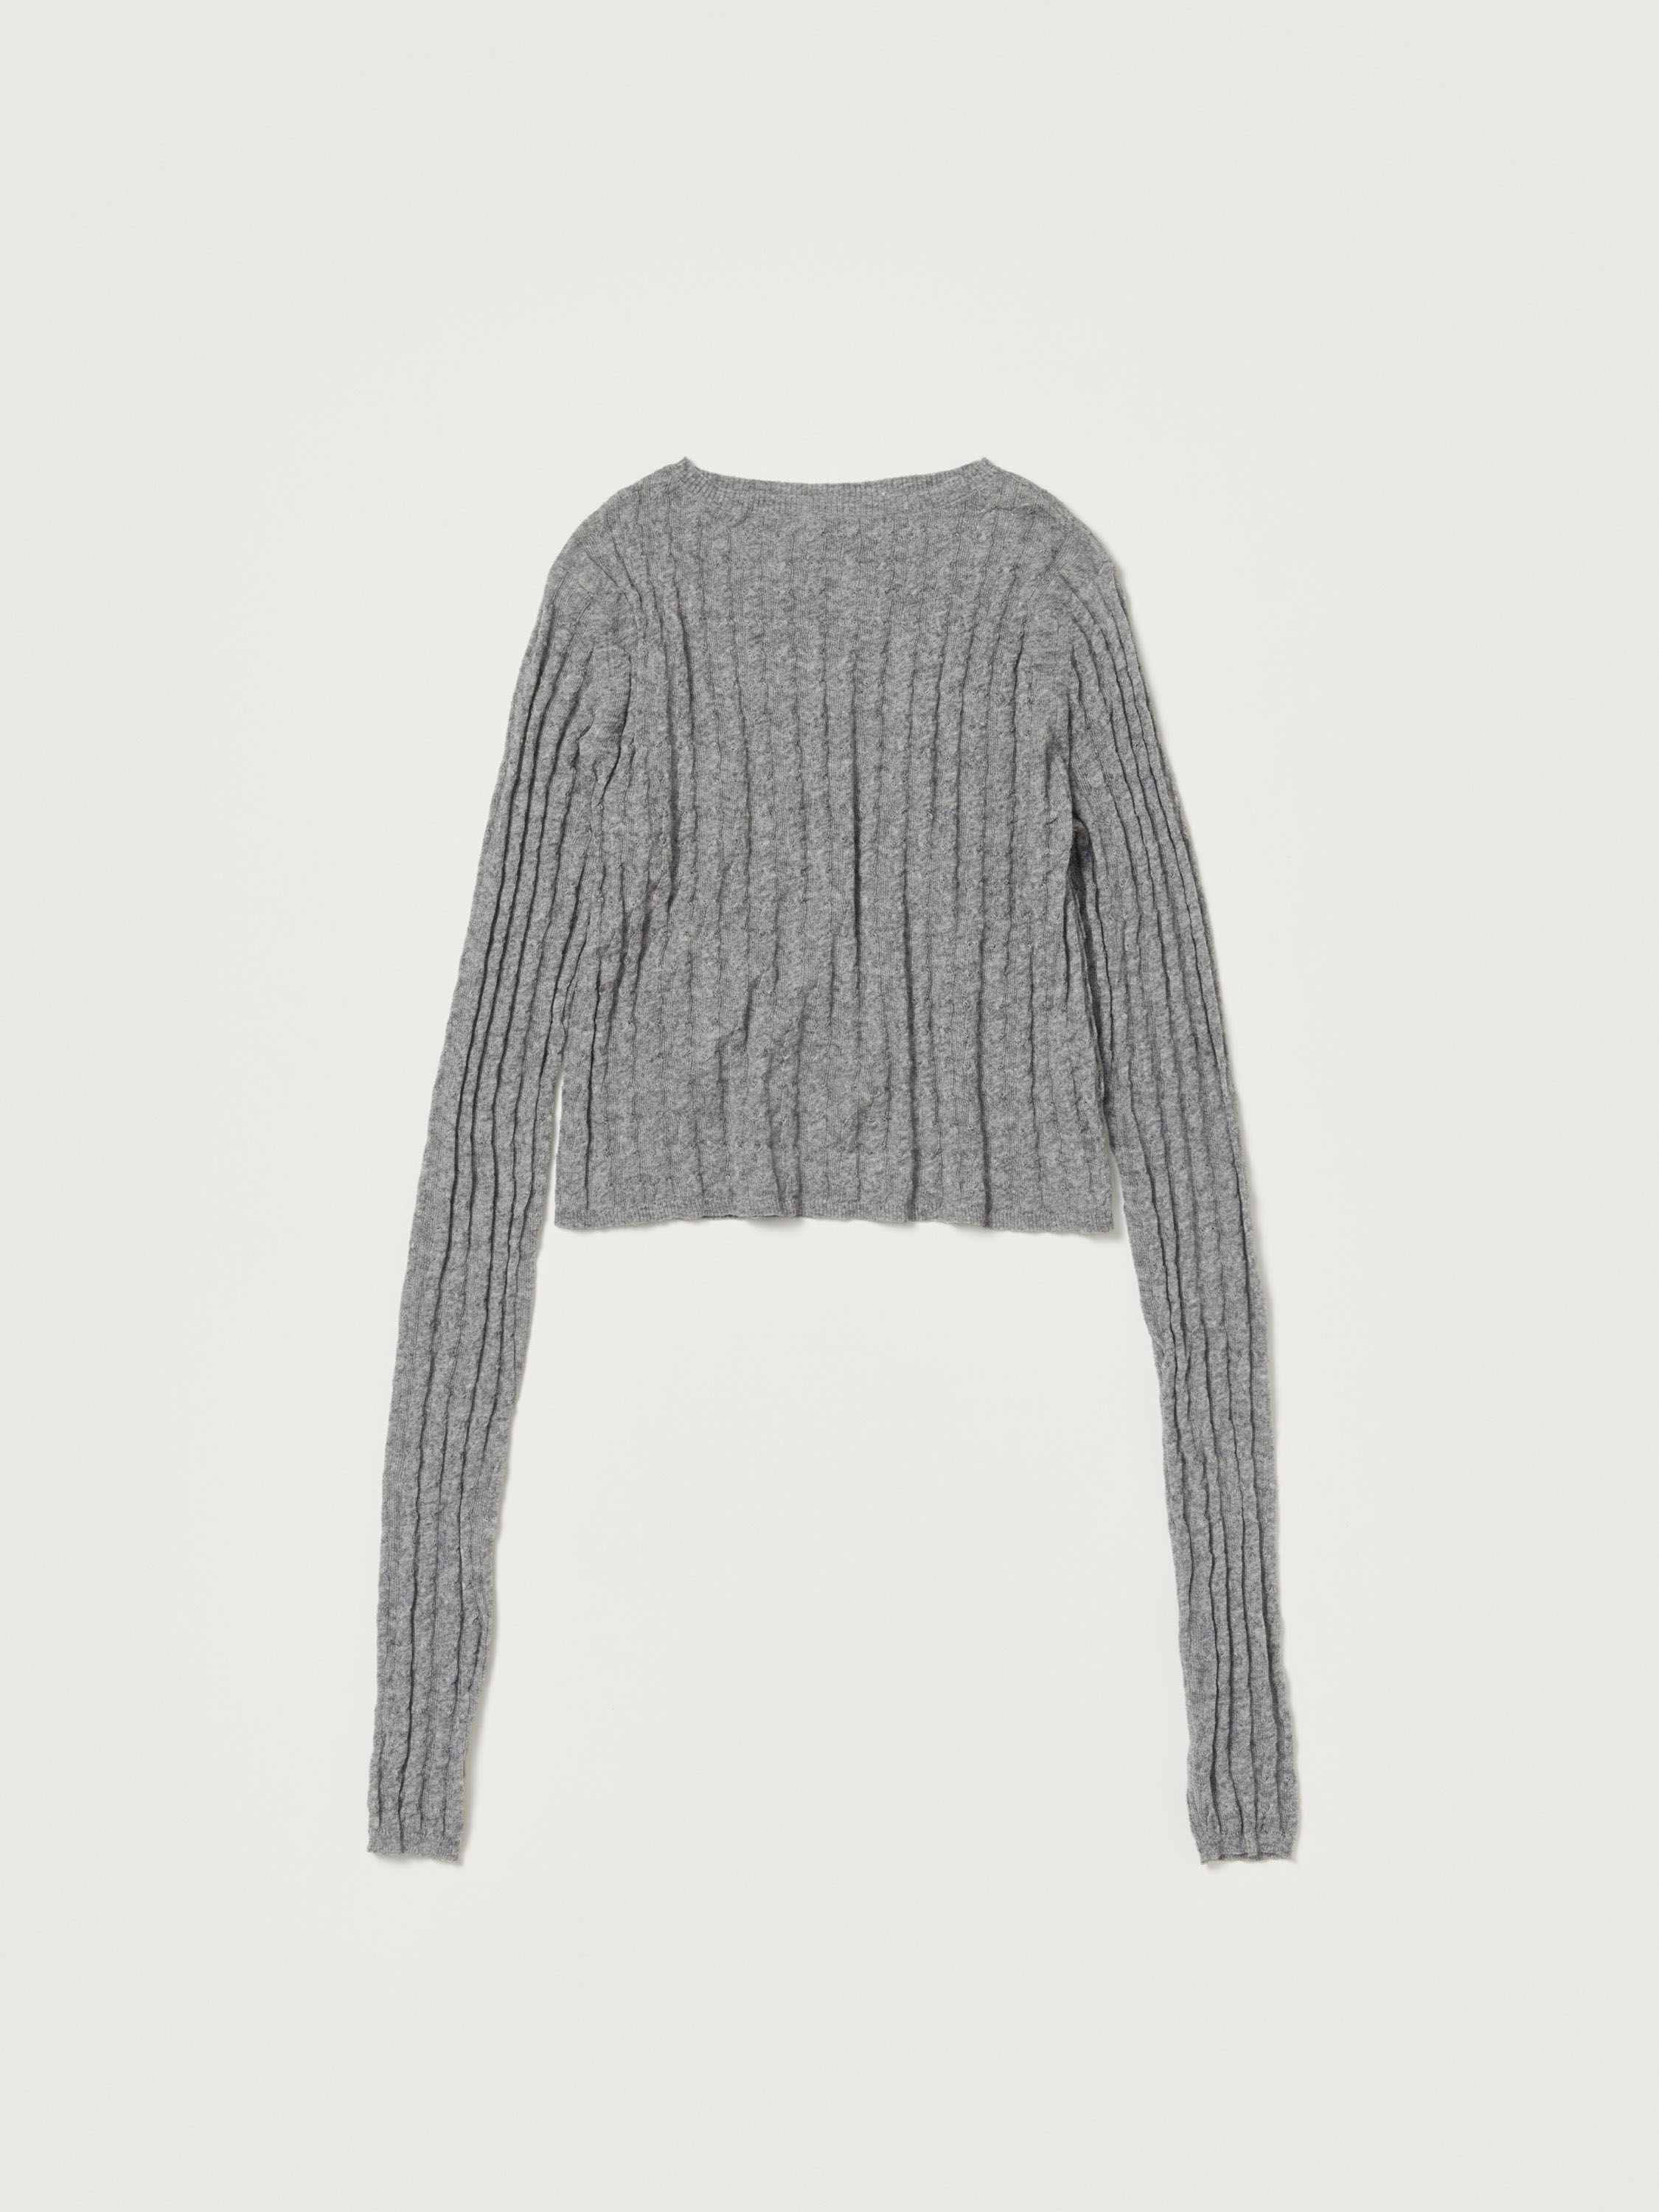 WASHABLE CASHMERE SILK CABLE KNIT P/O 詳細画像 TOP GRAY 4